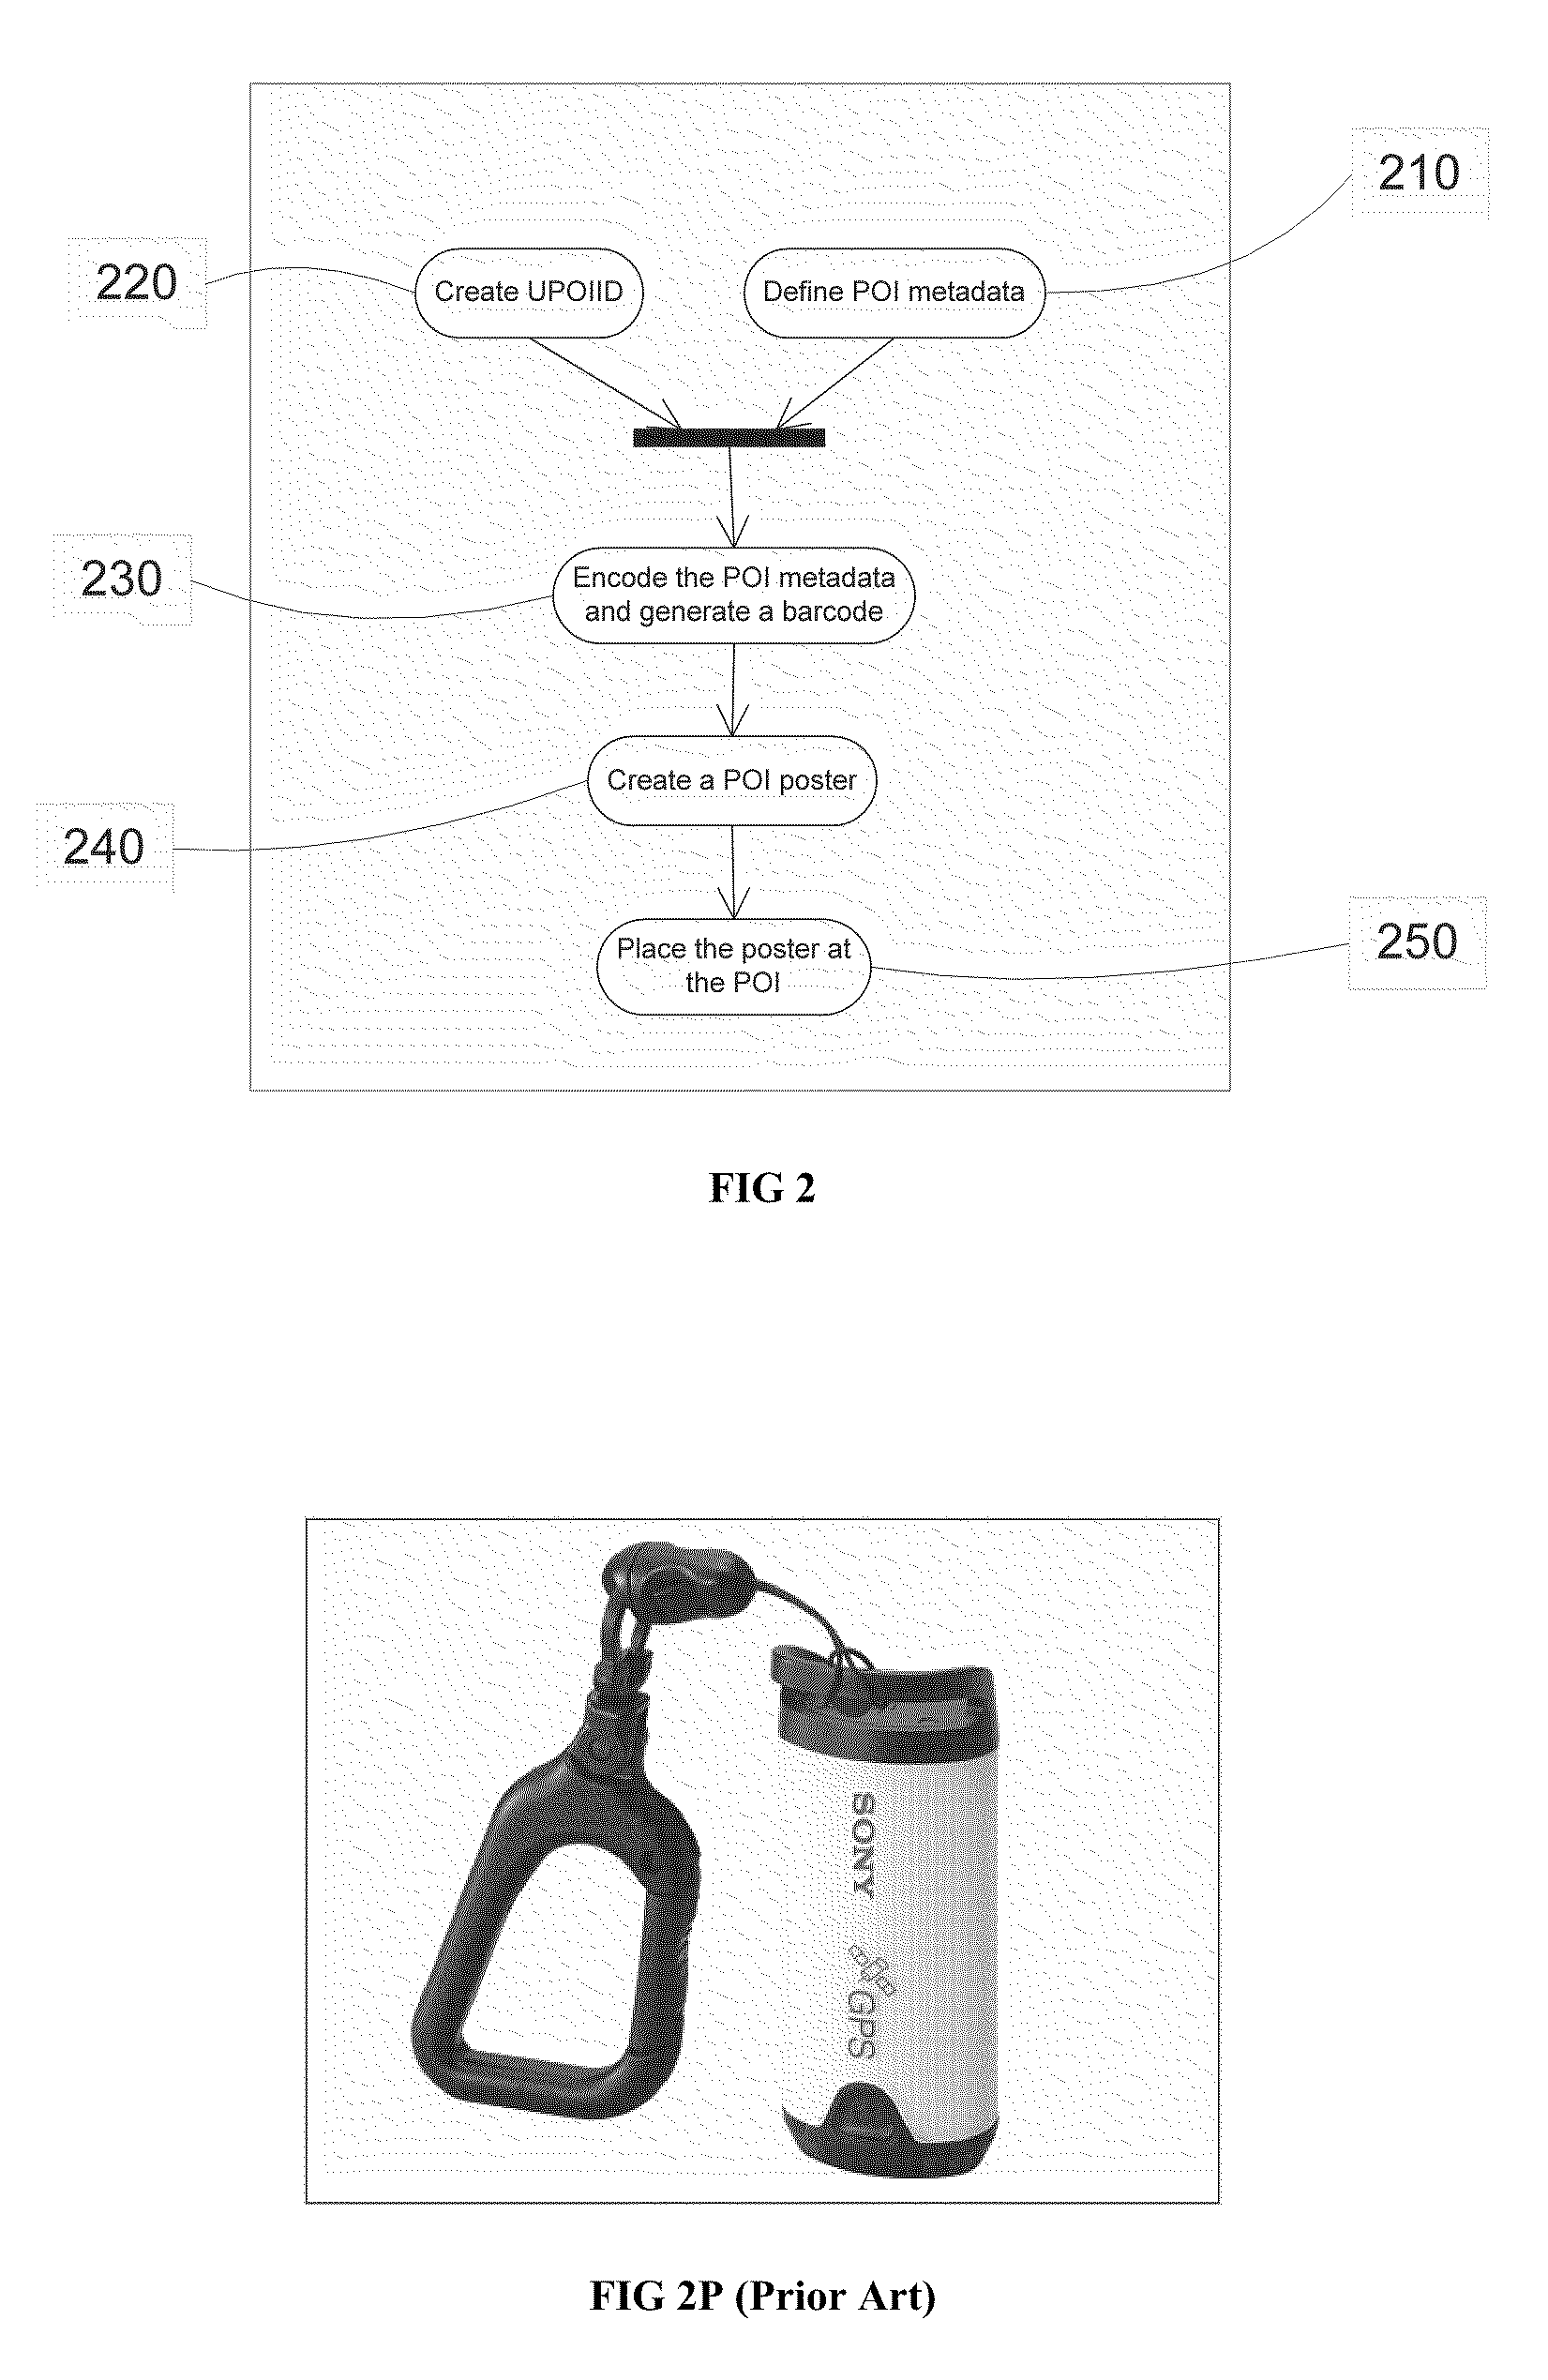 Method of Automatically Tagging Image Data